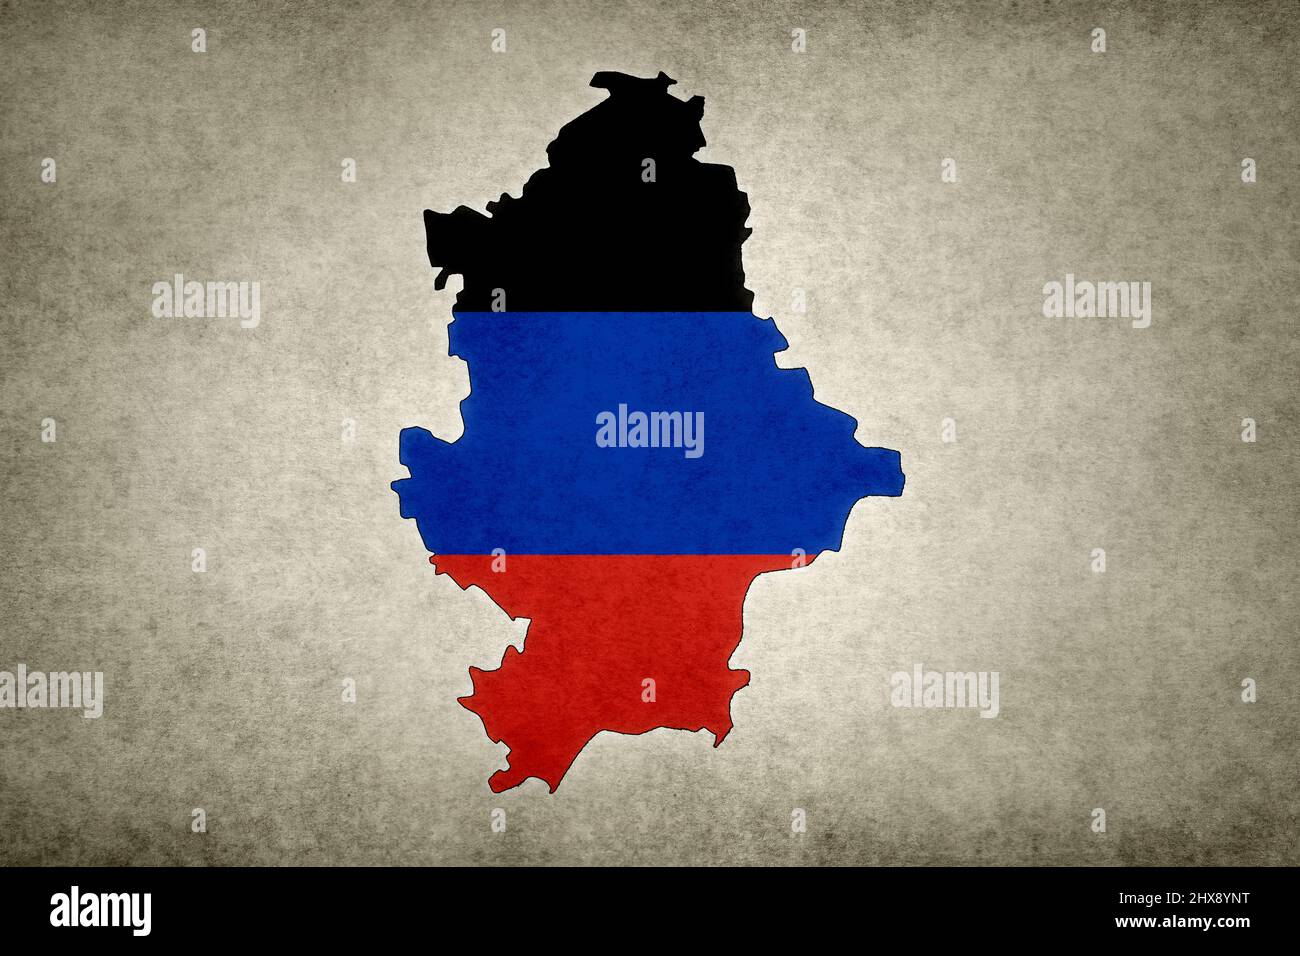 Grunge map of Donetsk with its flag printed within its border on an old paper. Stock Photo